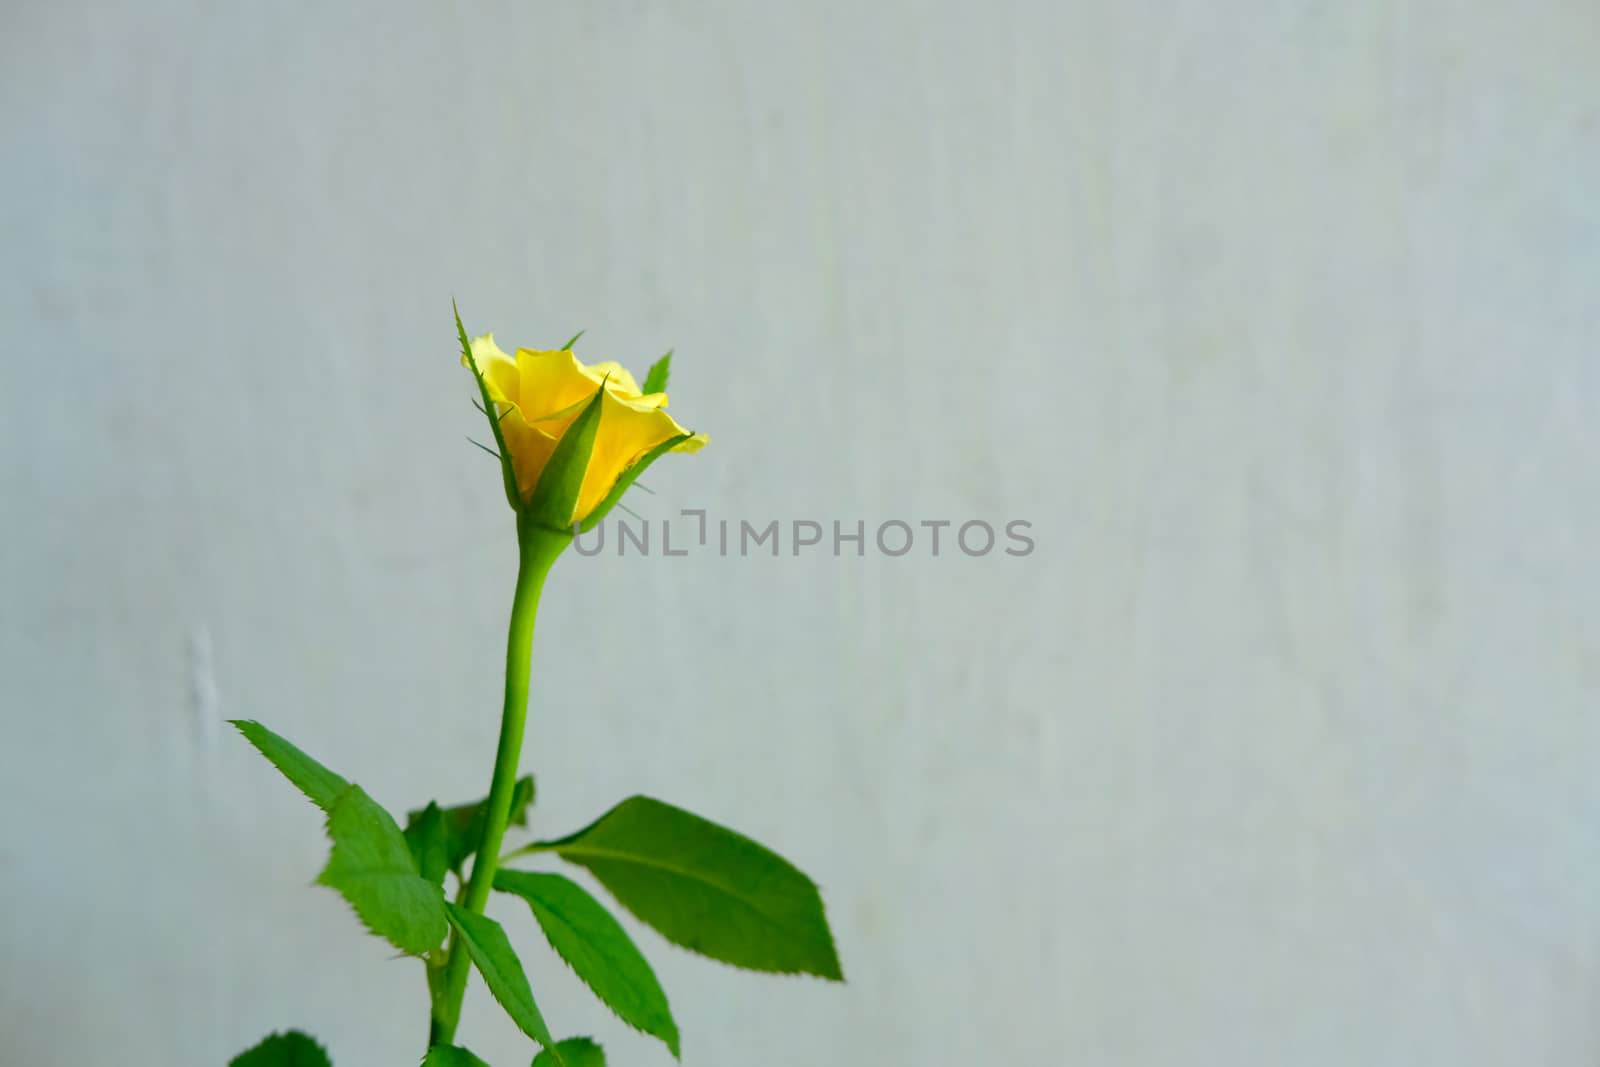 yellow rose flower ready to bloom. Image photo